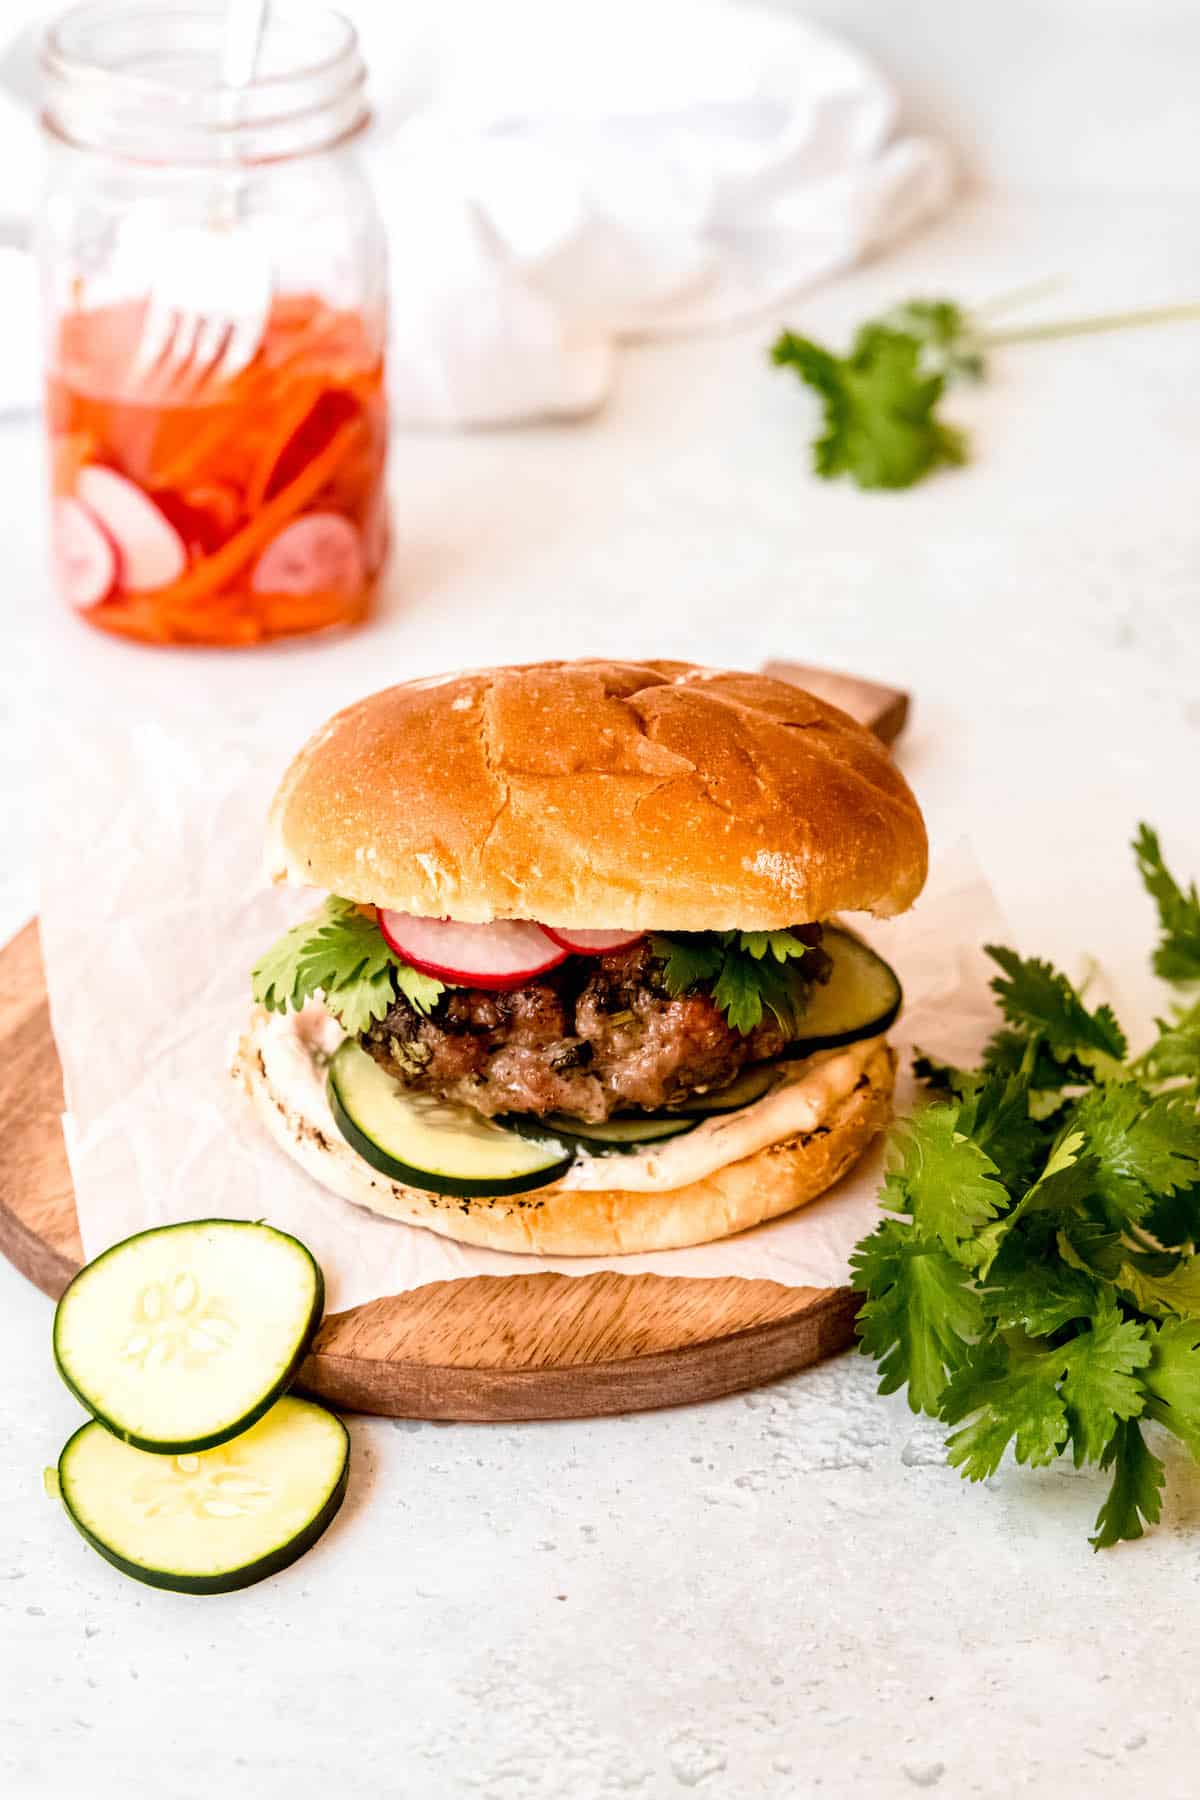 table set with a wooden serving board holding an Asian pork burger with a jar of pickled banh mi veggies, a bunch of fresh cilantro, and slices of fresh cucumber around.